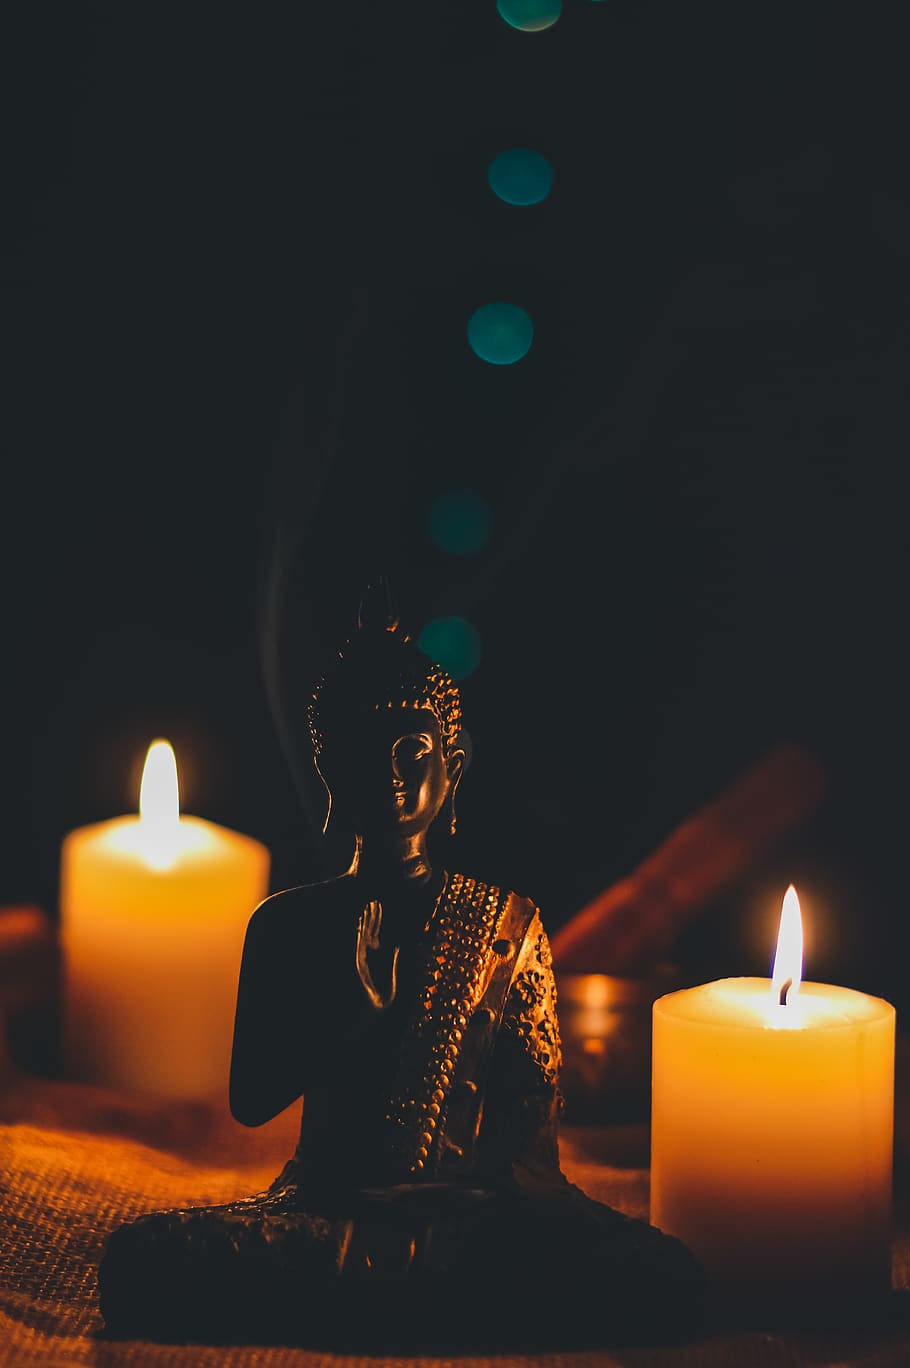 Black Background With Candle - Black Wallpaper HD-mncb.edu.vn